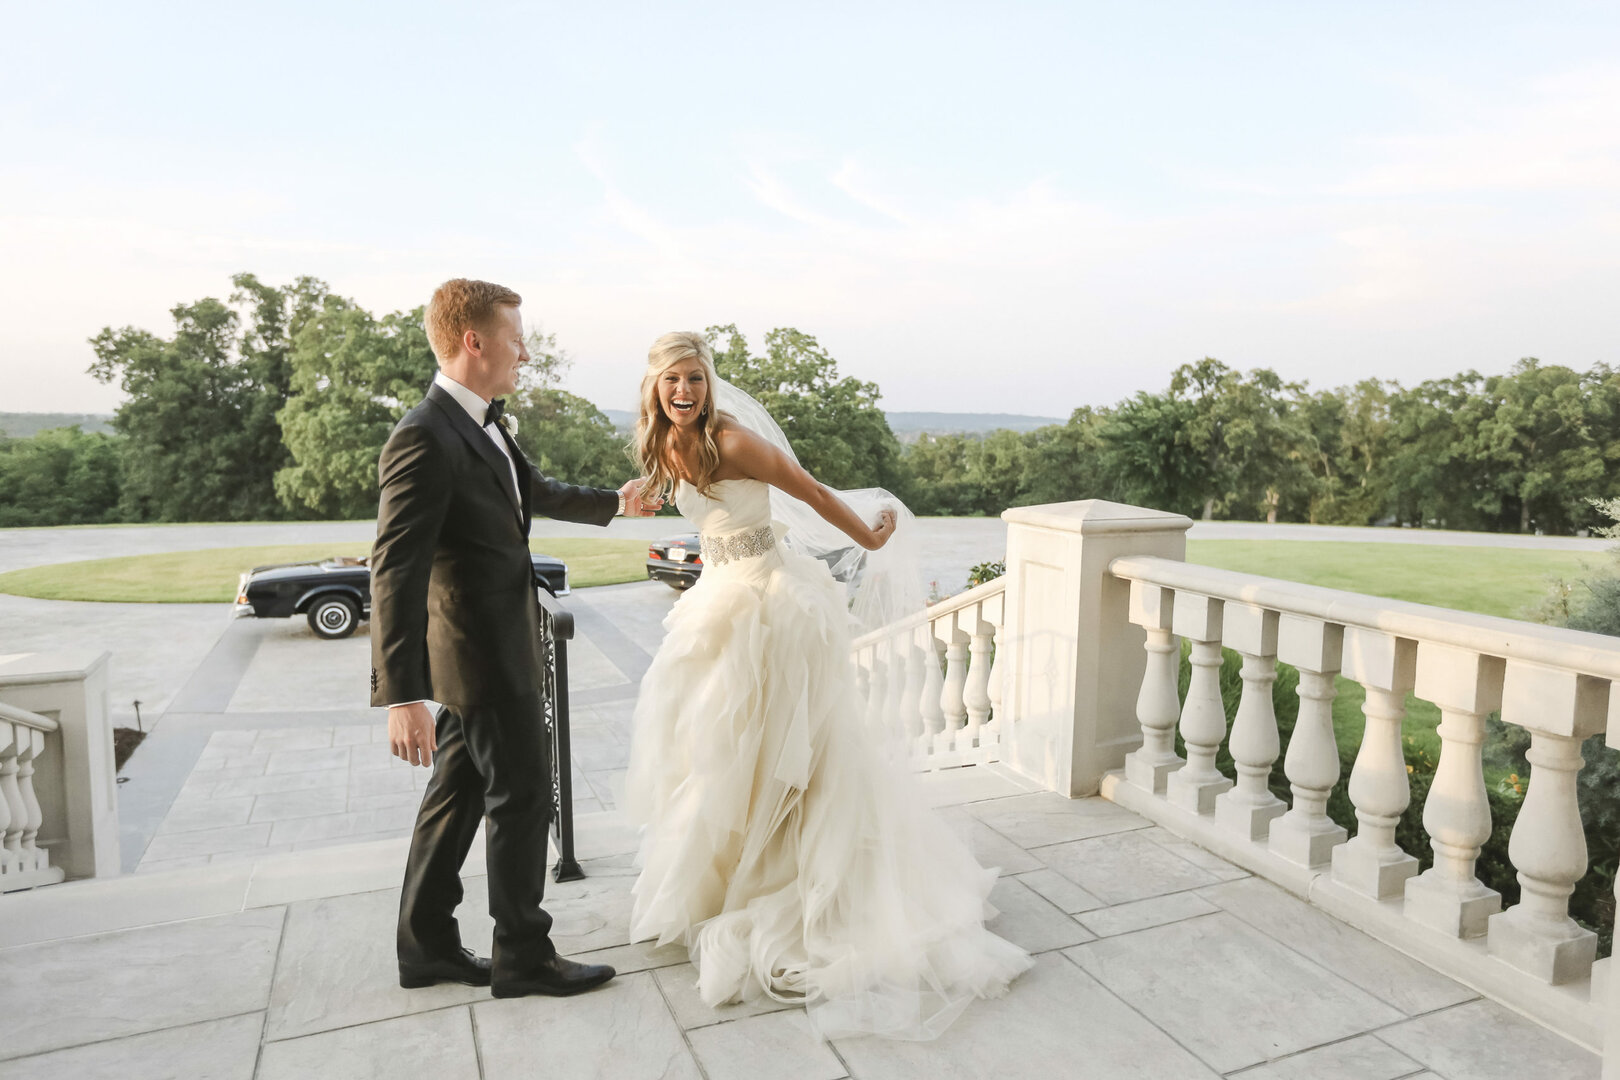 luxury wedding at private estate with high end photographer after the wedding ceremony on the front steps with a vintage mercedes benz in the background